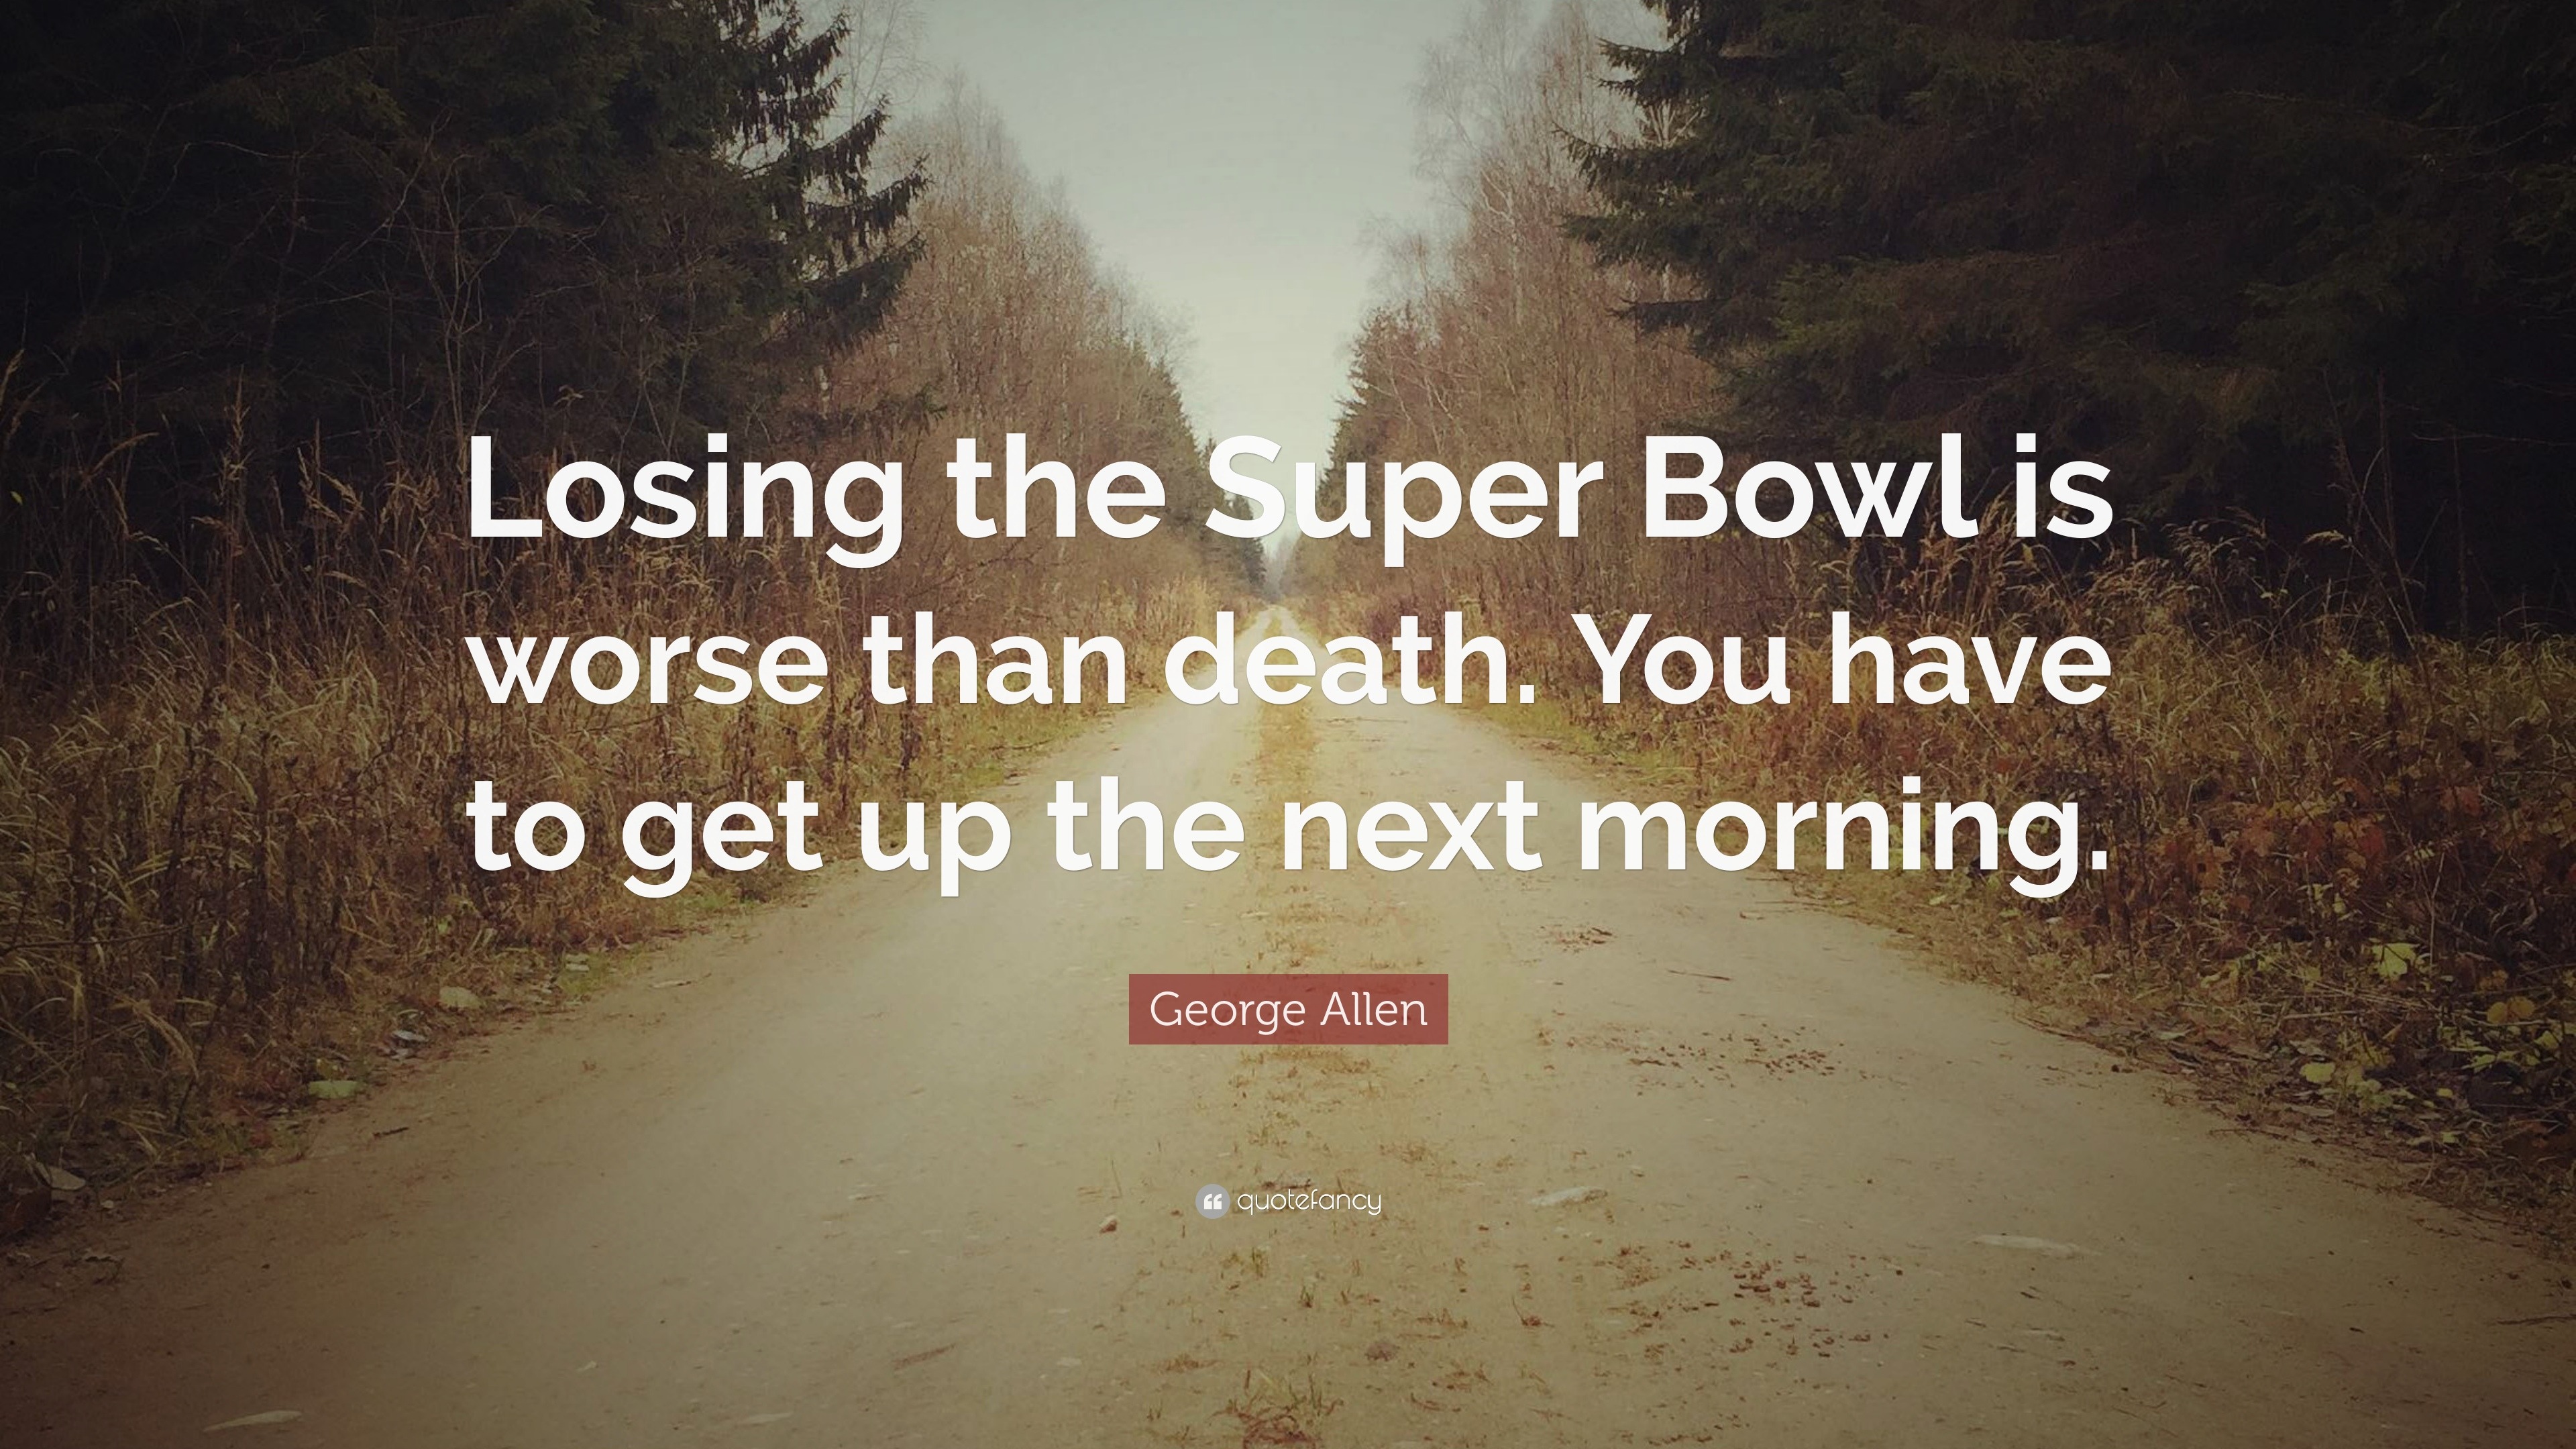 Allen Quote “Losing the Super Bowl is worse than death. You